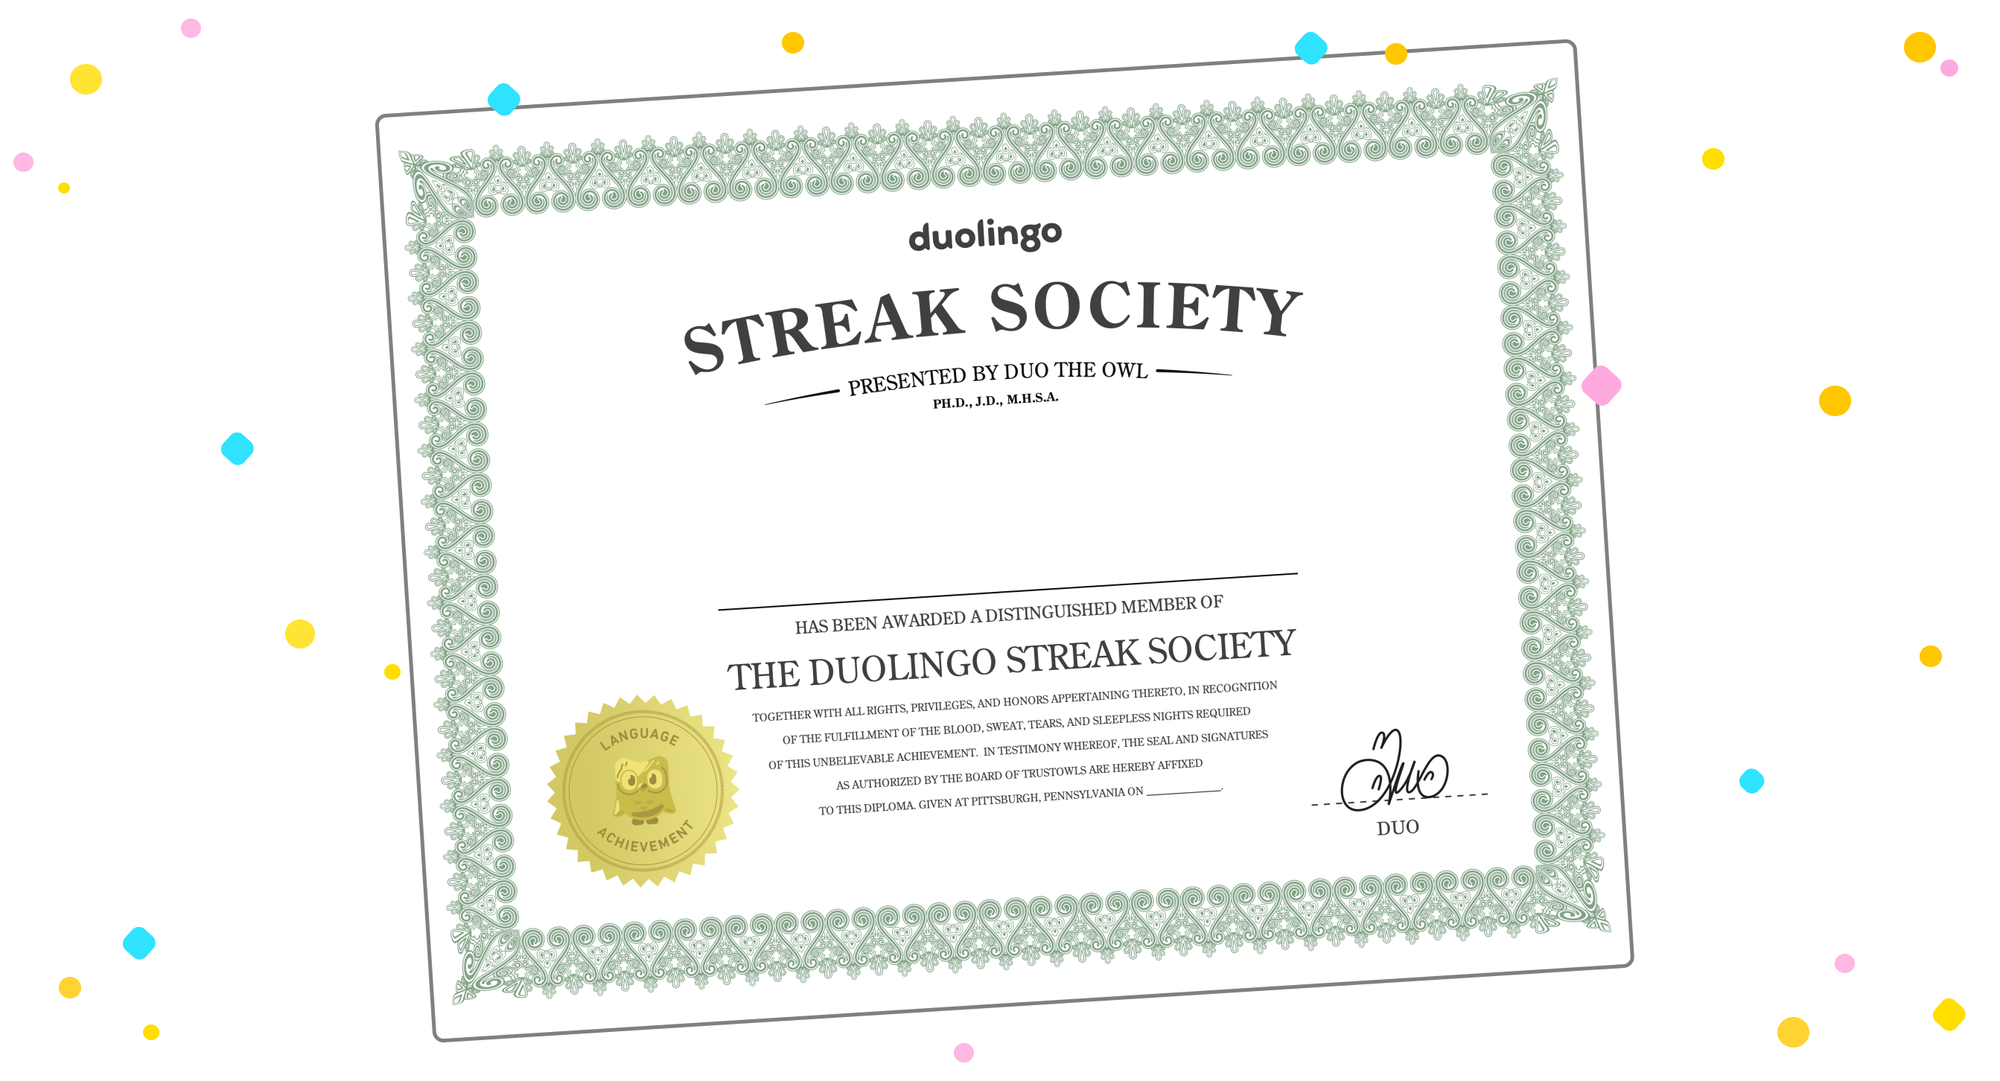 Image of a Duolingo Streak Society certificate that : [fill in name here] has been awarded a distinguished member of The Duolingo Streak Society. Together with all rights, privileges, and honors appertaining thereto, in recognition of the fulfillment of the blood, sweat, tears, and sleepless nights required of this unbelievable achievement. In testimony whereof, the seal and signatures as authorized by the board of trustowls are hereby affixed to this diploma.